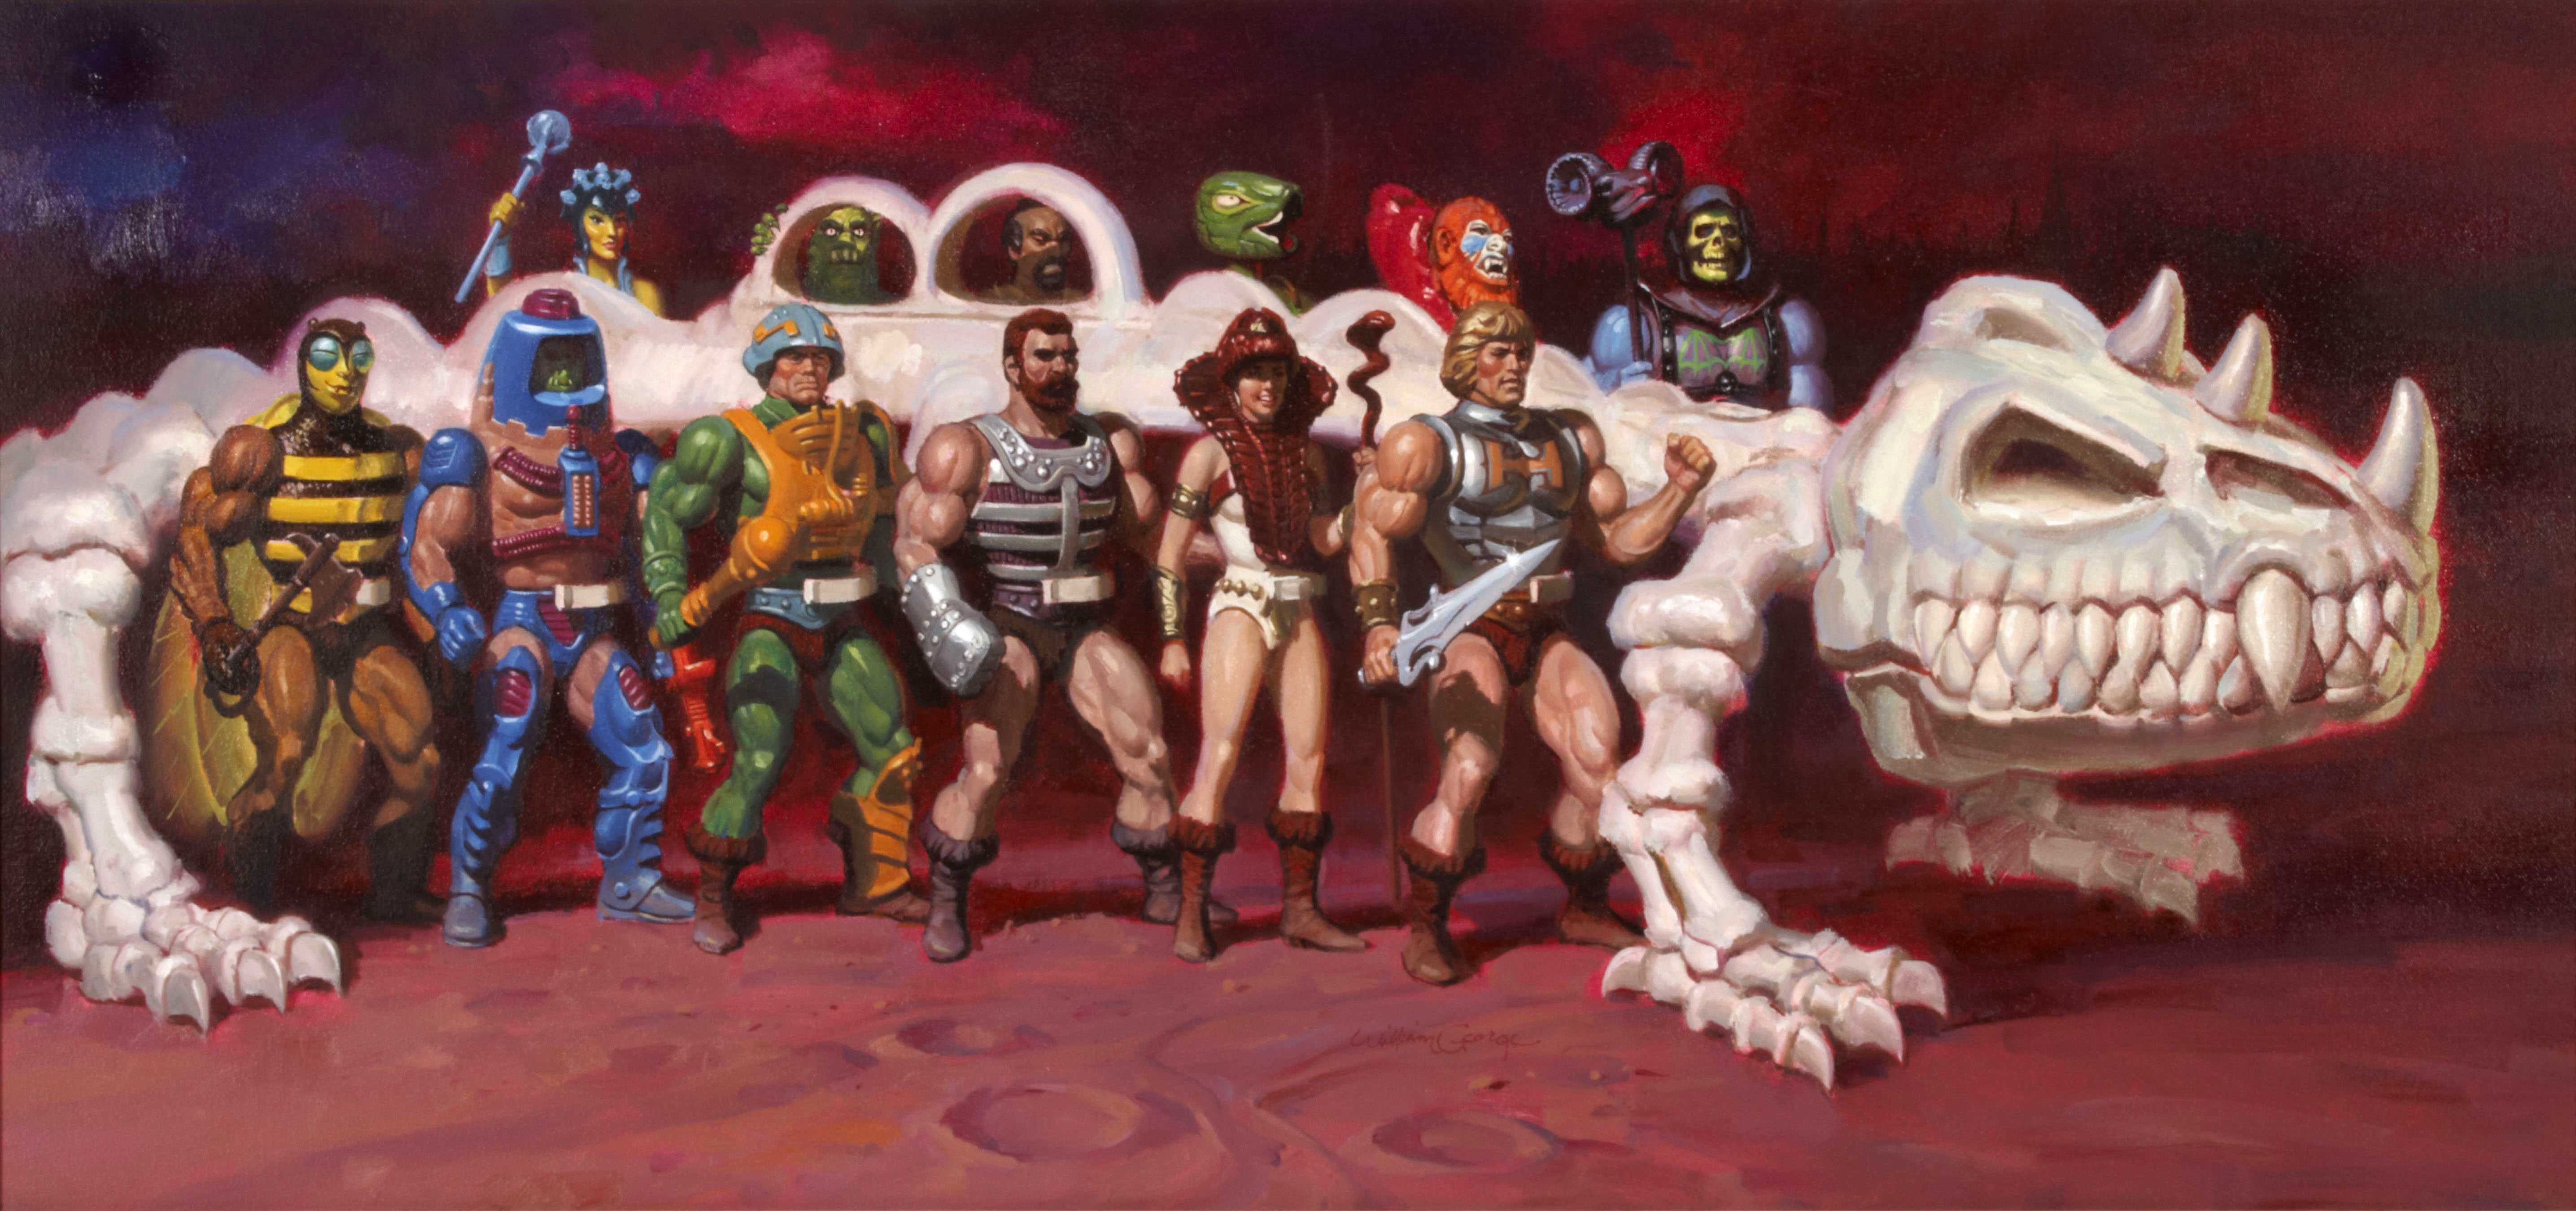 TV Show He Man And The Masters Of The Universe 5742x2700